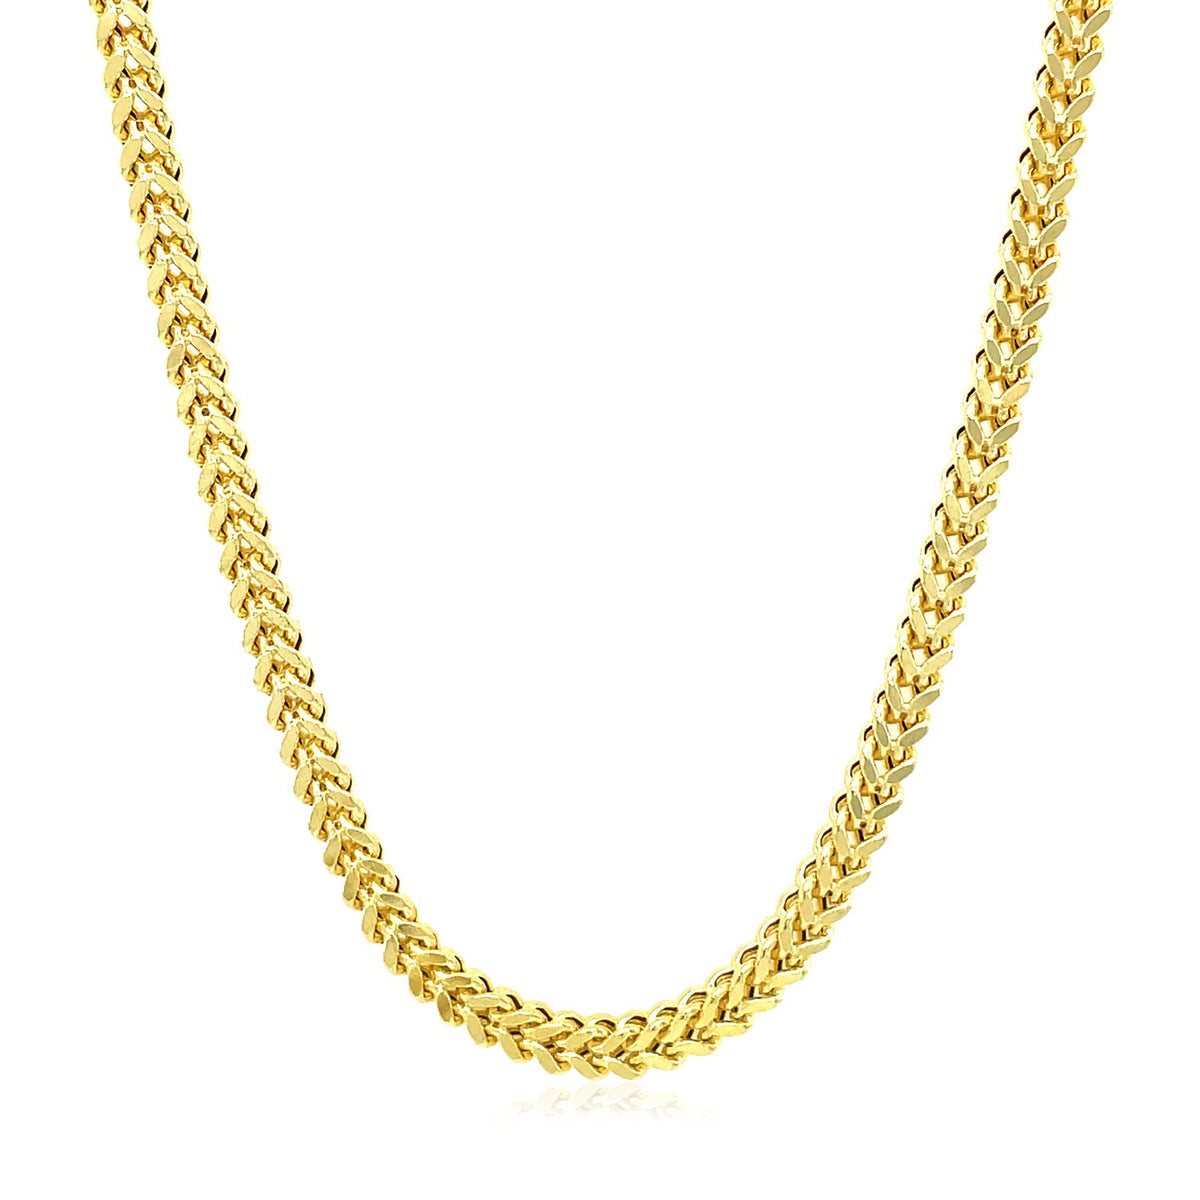 Square Franco Chain - 14k Yellow Gold 3.00mm